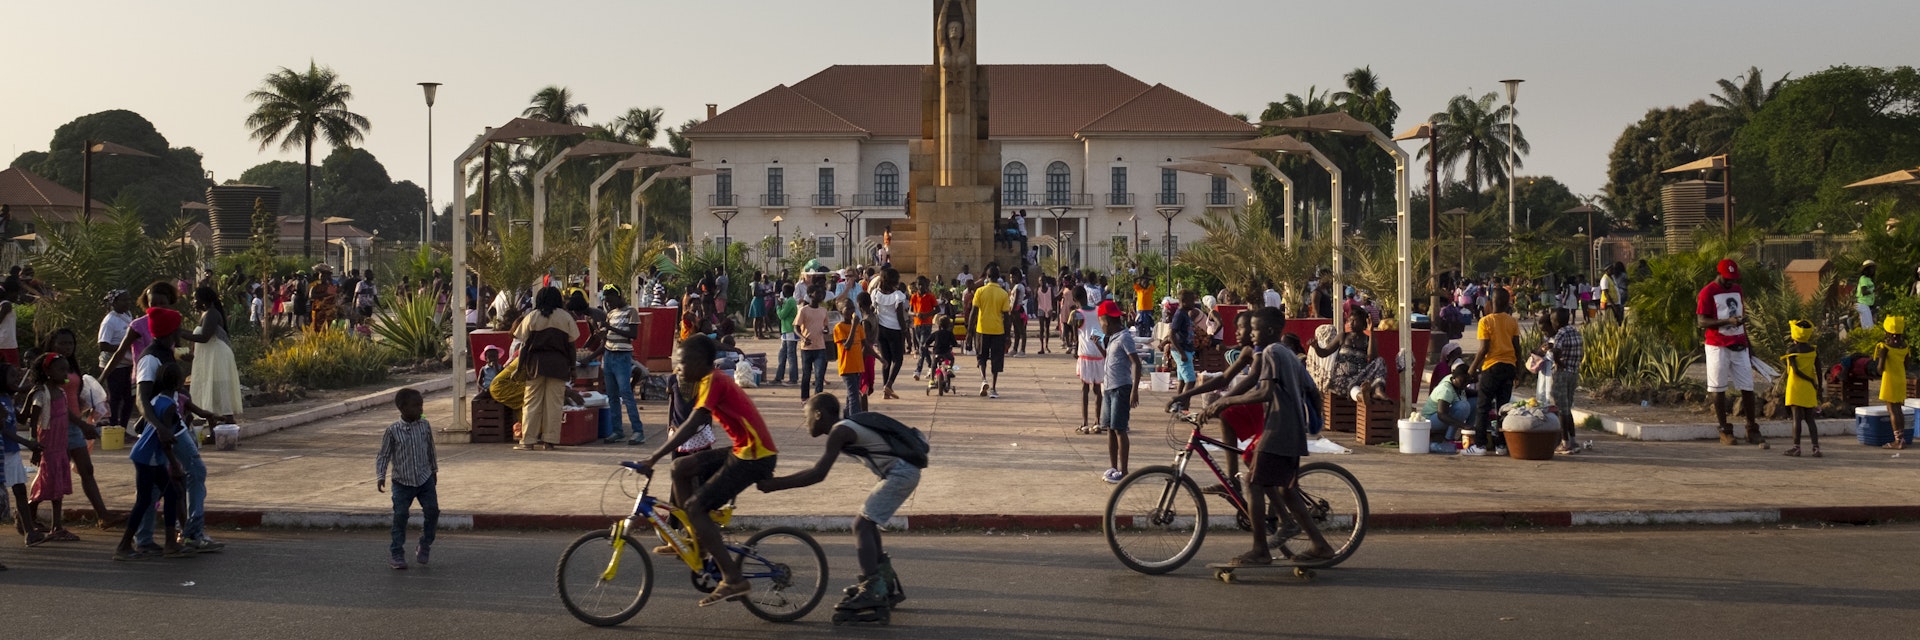 Bissau, Republic of Guinea-Bissau - February 11, 2018: Street scene in the city of Bissau with people at the Praca dos Herois Nacionais, in Guinea-Bissau, West Africa